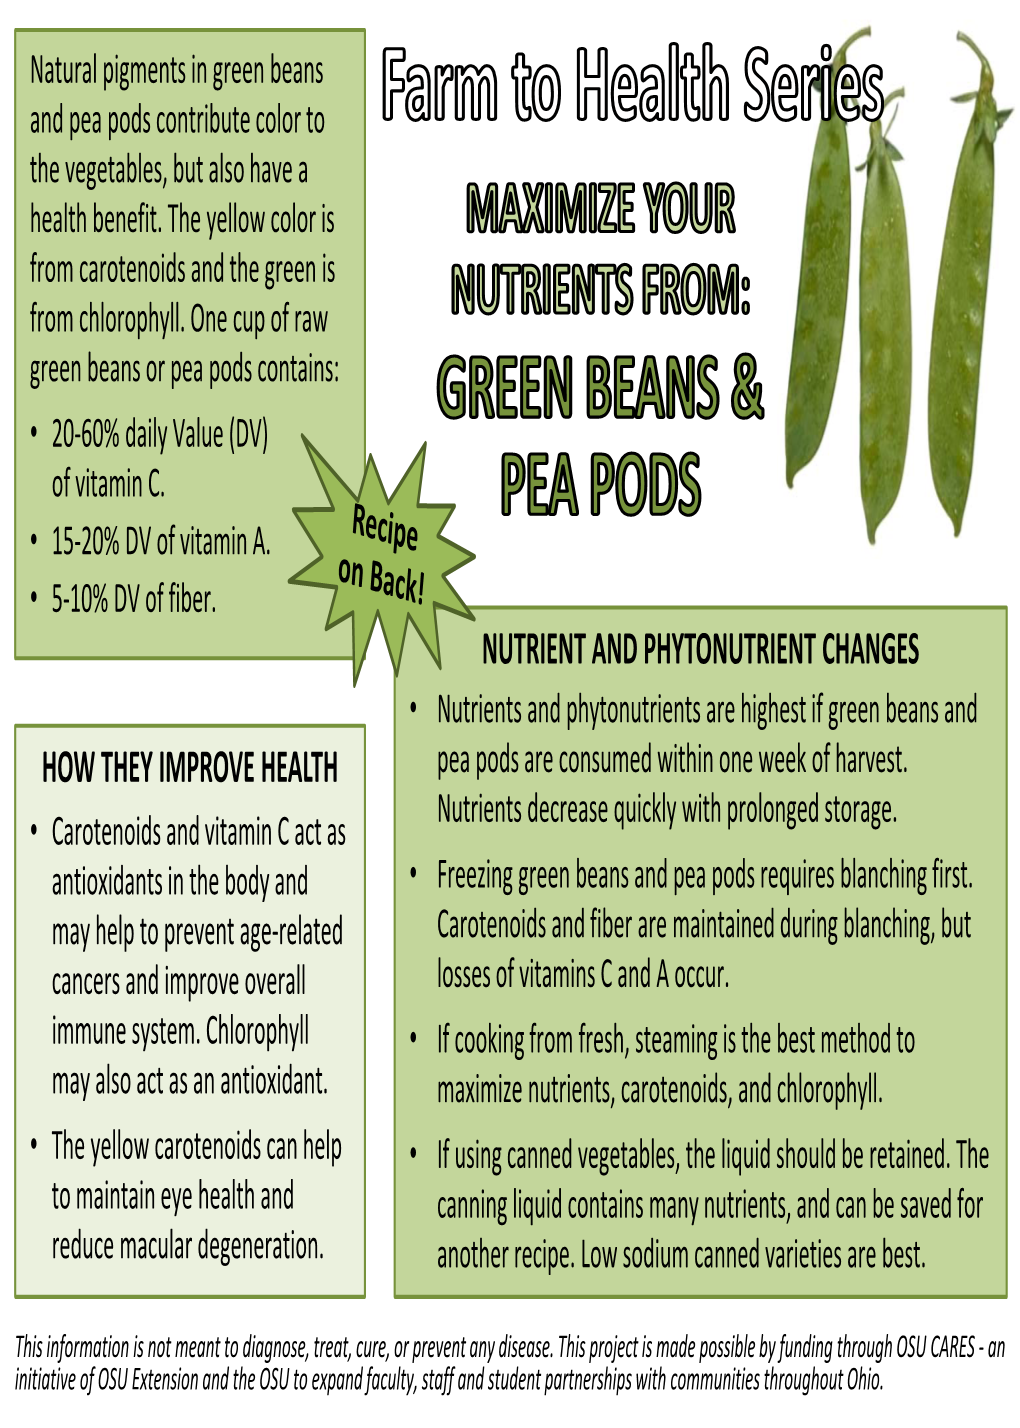 Green Beans and Pea Pods Contribute Color to the Vegetables, but Also Have a Health Benefit